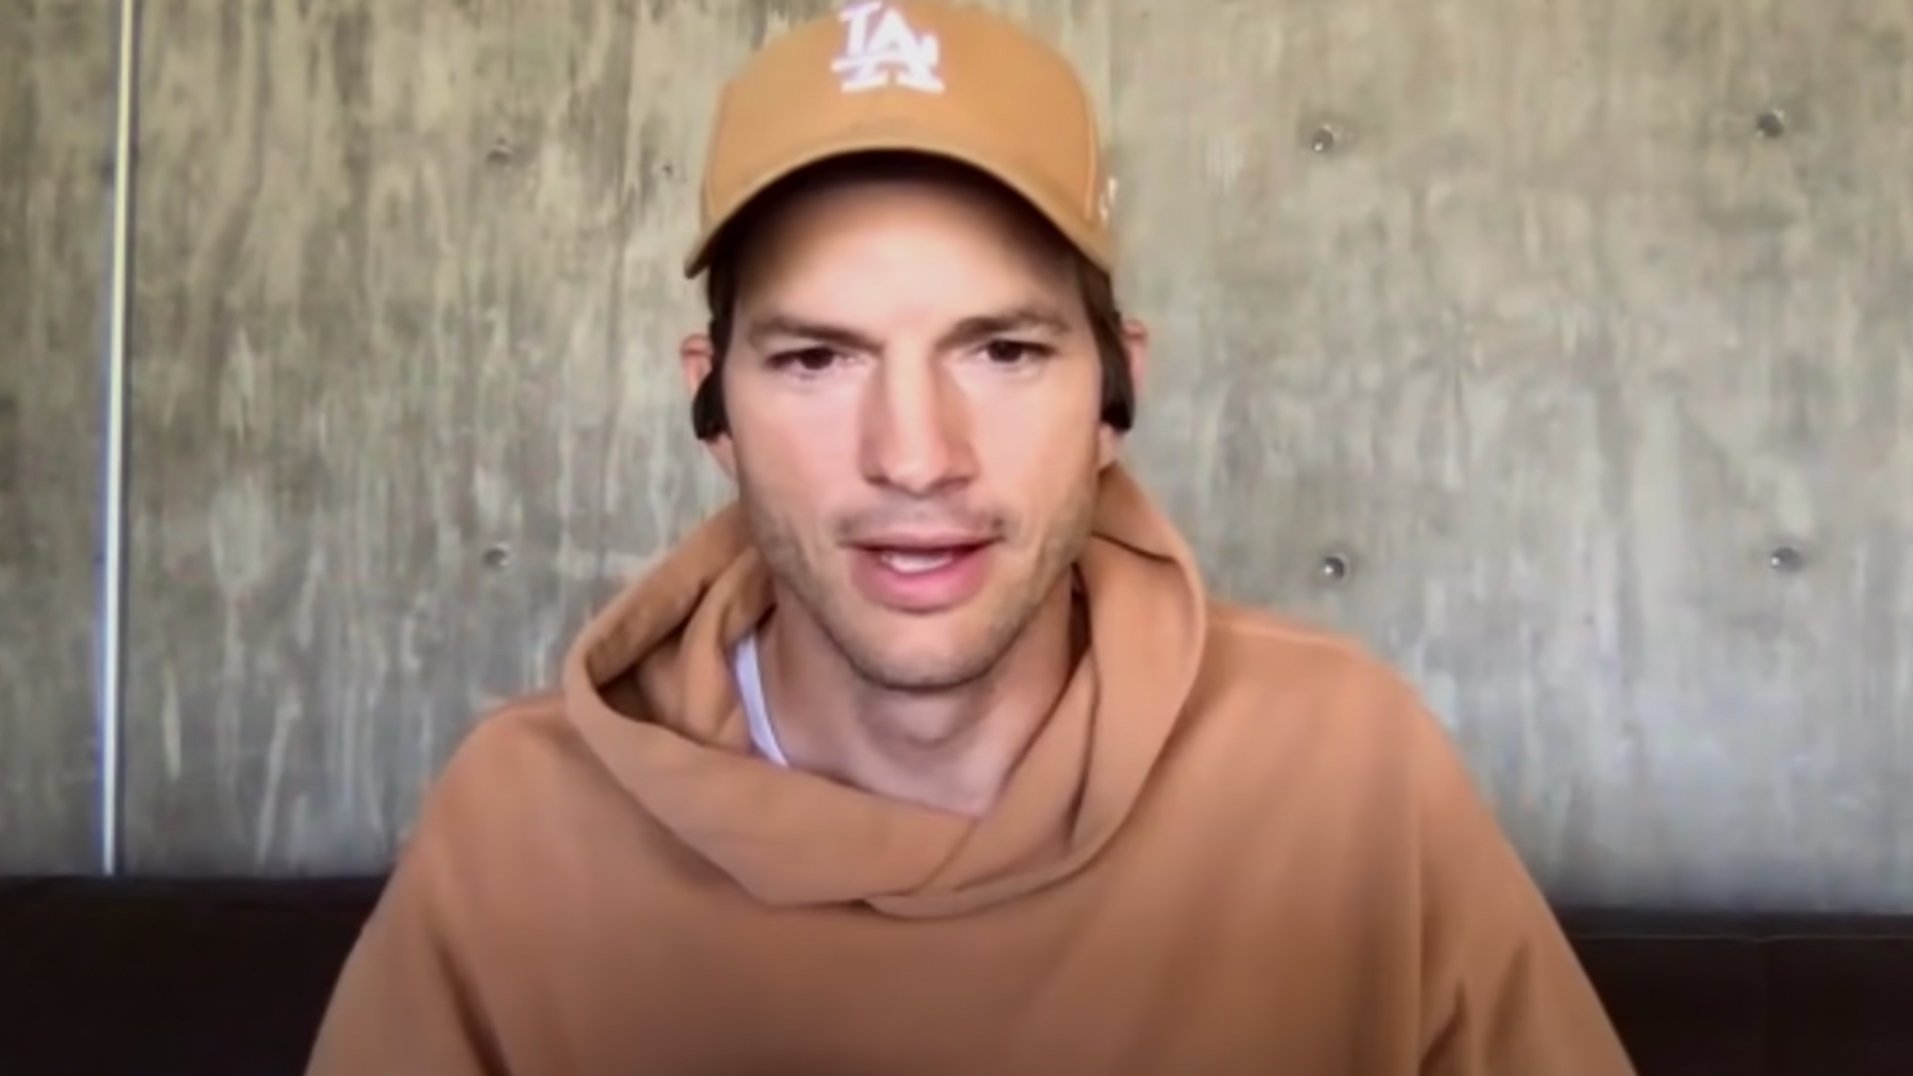 Ashton Kutcher Shifts Attention to Family Time After Health Scare